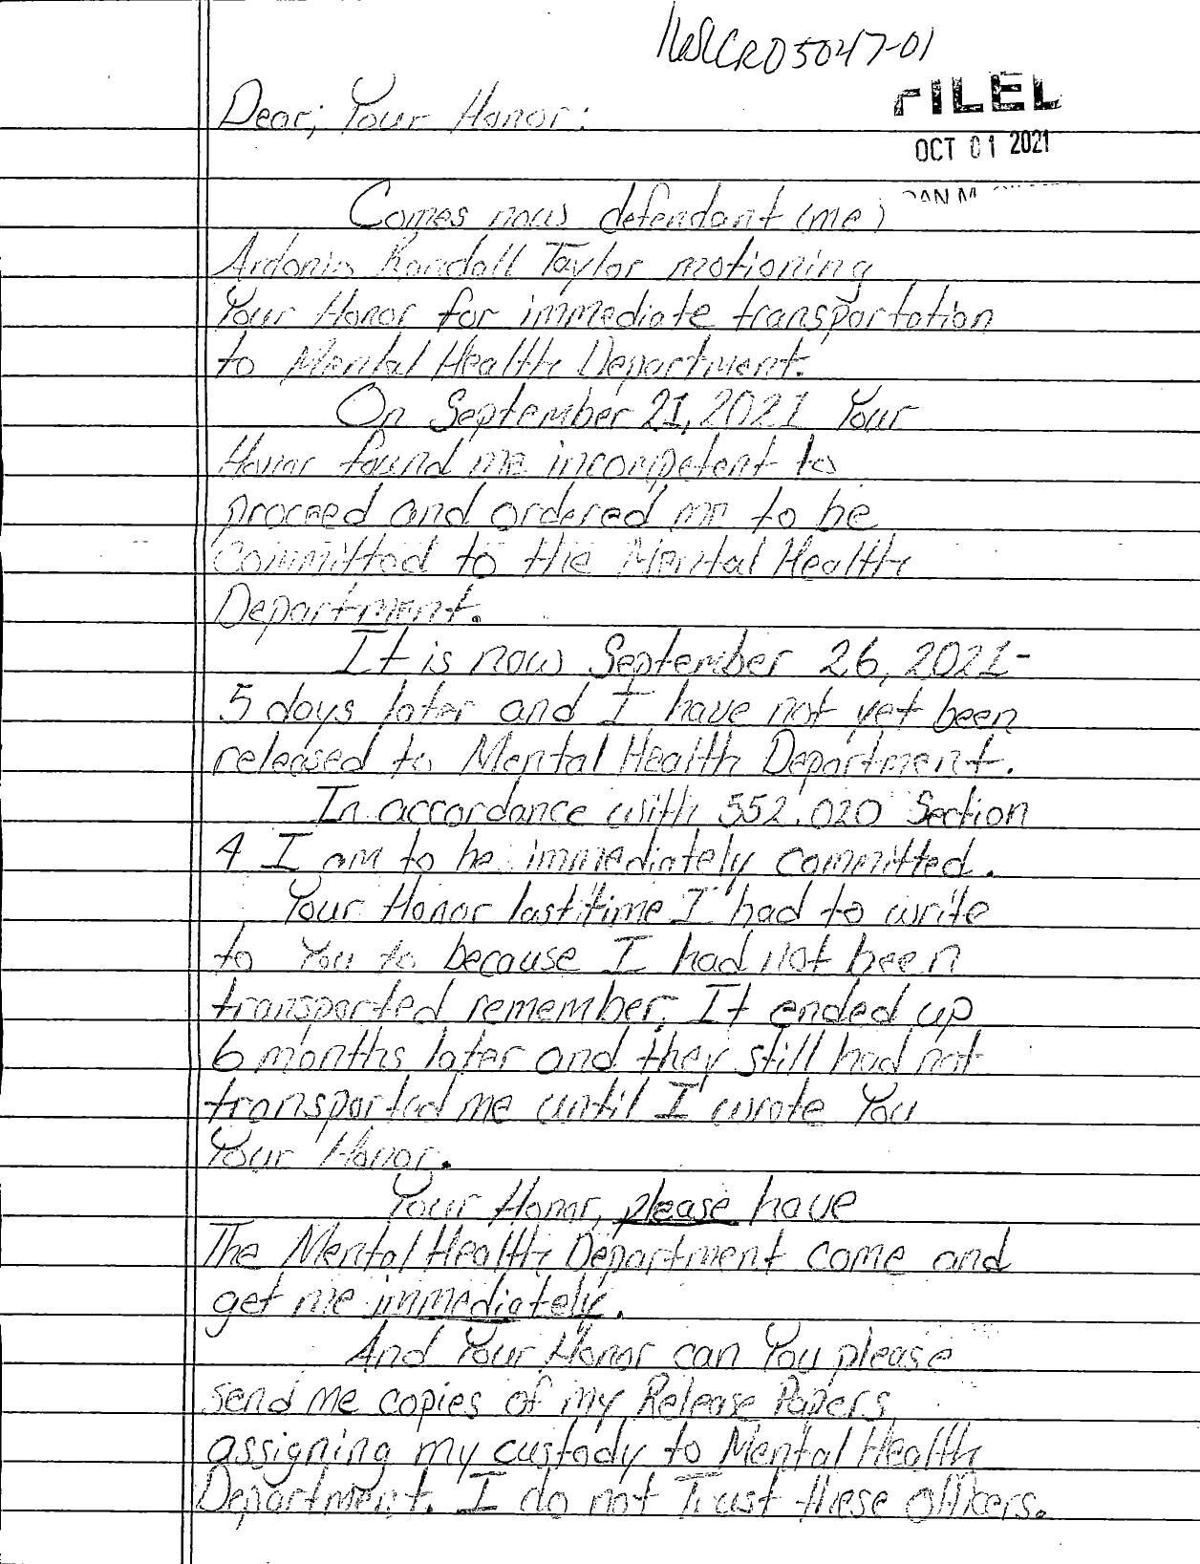 Antonio Taylor letter to the judge